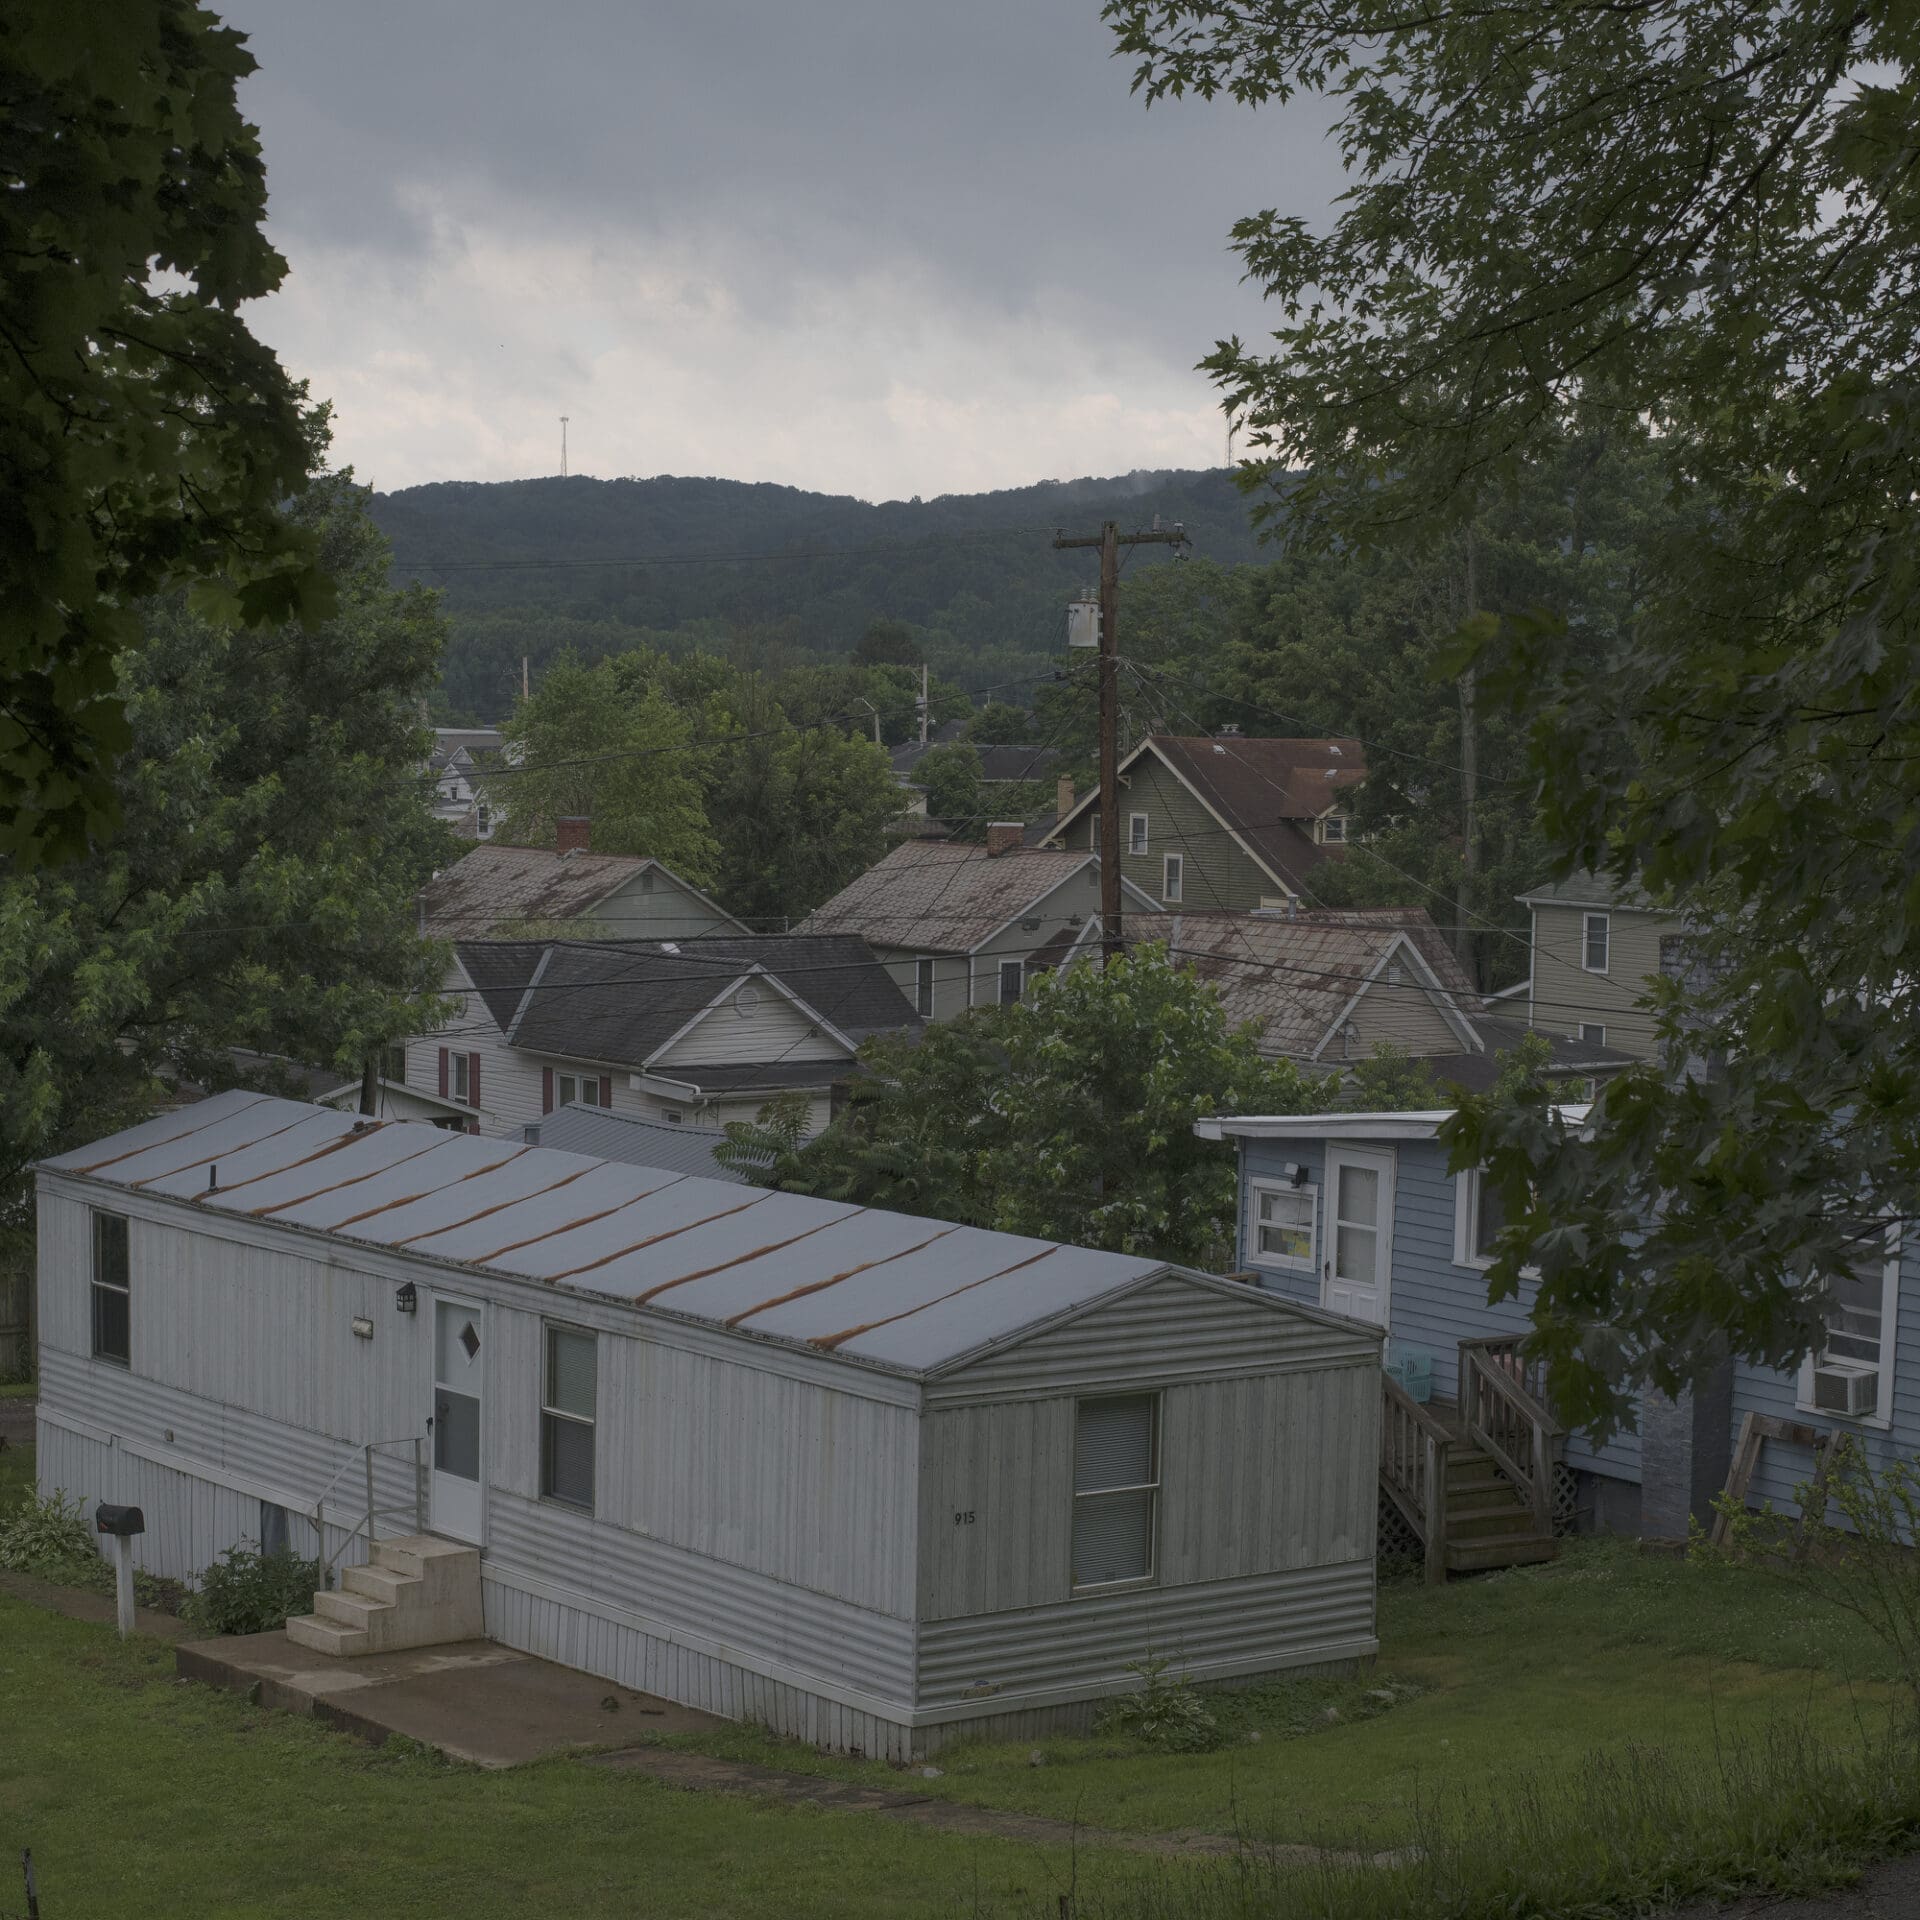 Photographer Rich-Joseph Facun | A view into Nelsonville in the Appalachian foothills, over a single-story whiteboard house and into the valley beyond